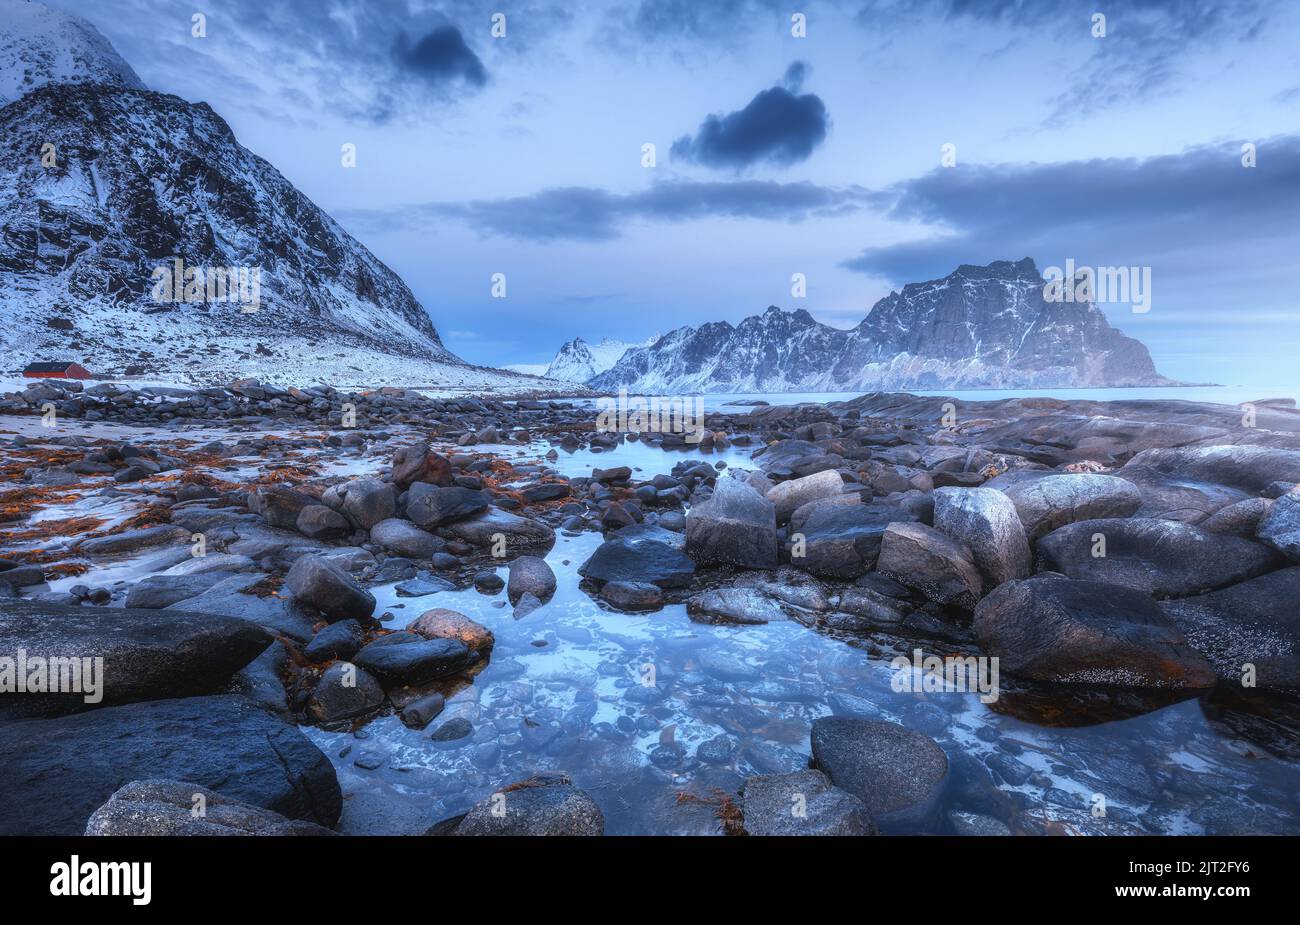 Sea coast with stones and blurred water, snowy rocky mountains Stock Photo